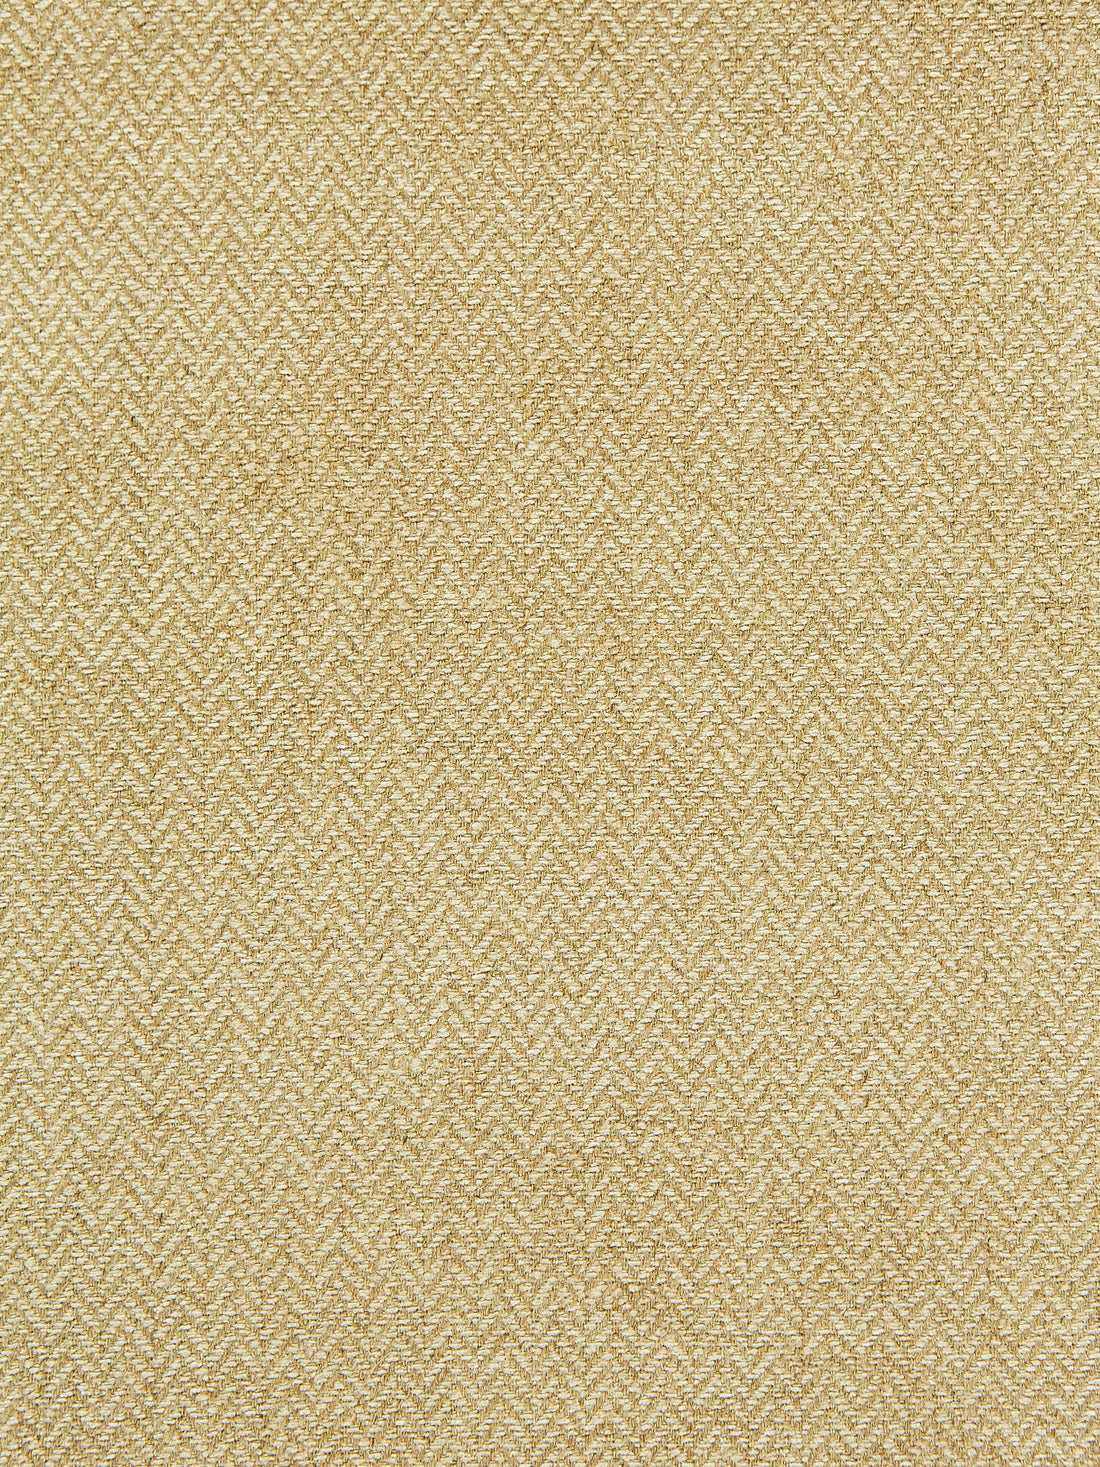 Oxford Herringbone Weave fabric in greige color - pattern number SC 000227006 - by Scalamandre in the Scalamandre Fabrics Book 1 collection